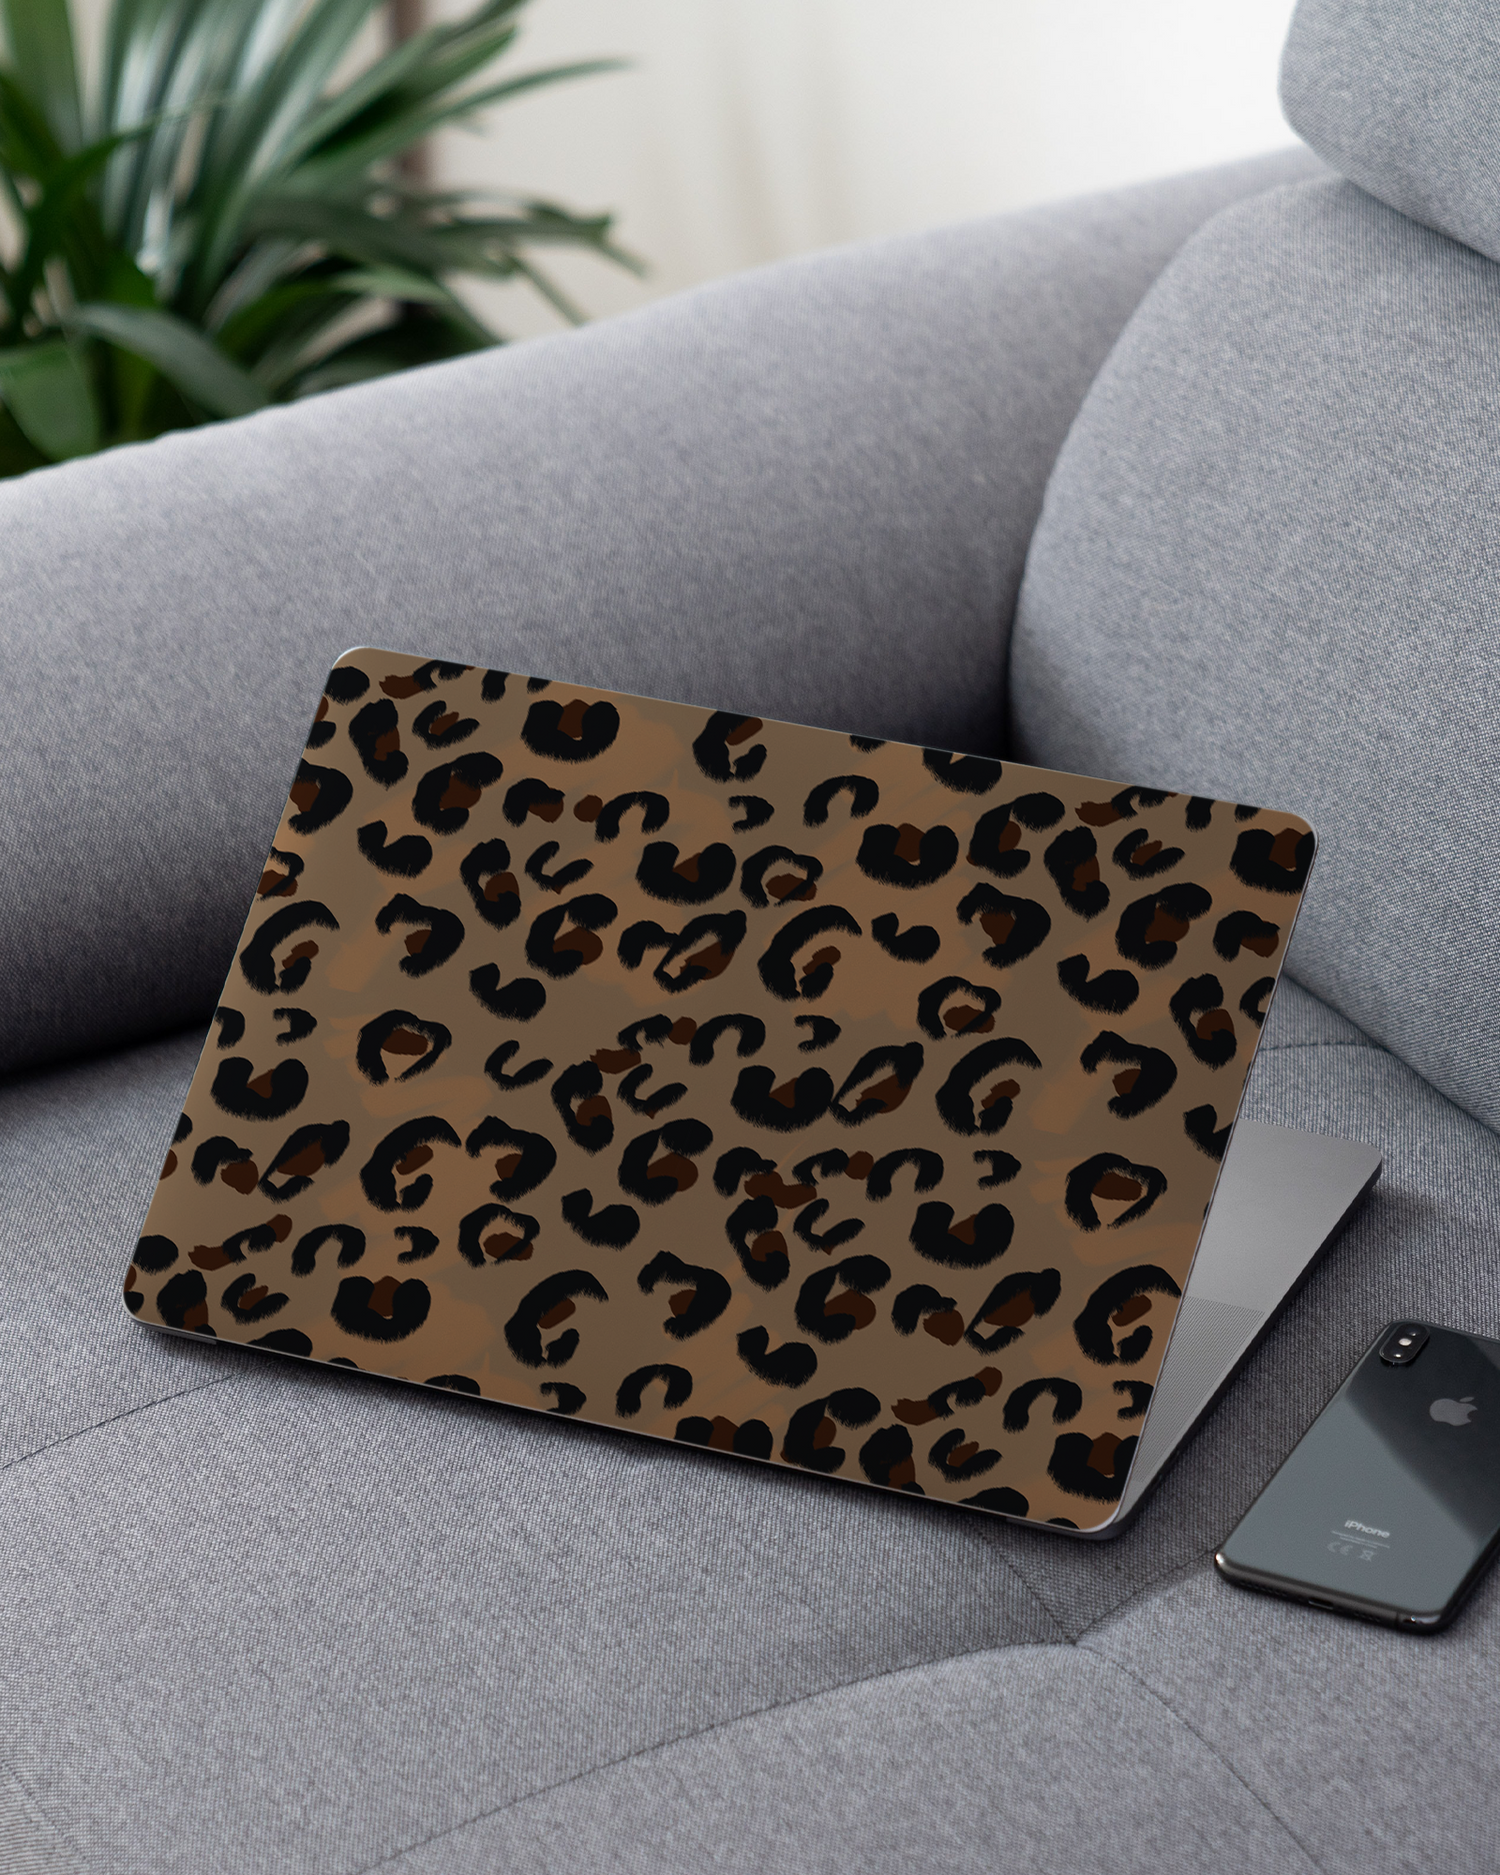 Leopard Repeat Laptop Skin for 13 inch Apple MacBooks on a couch